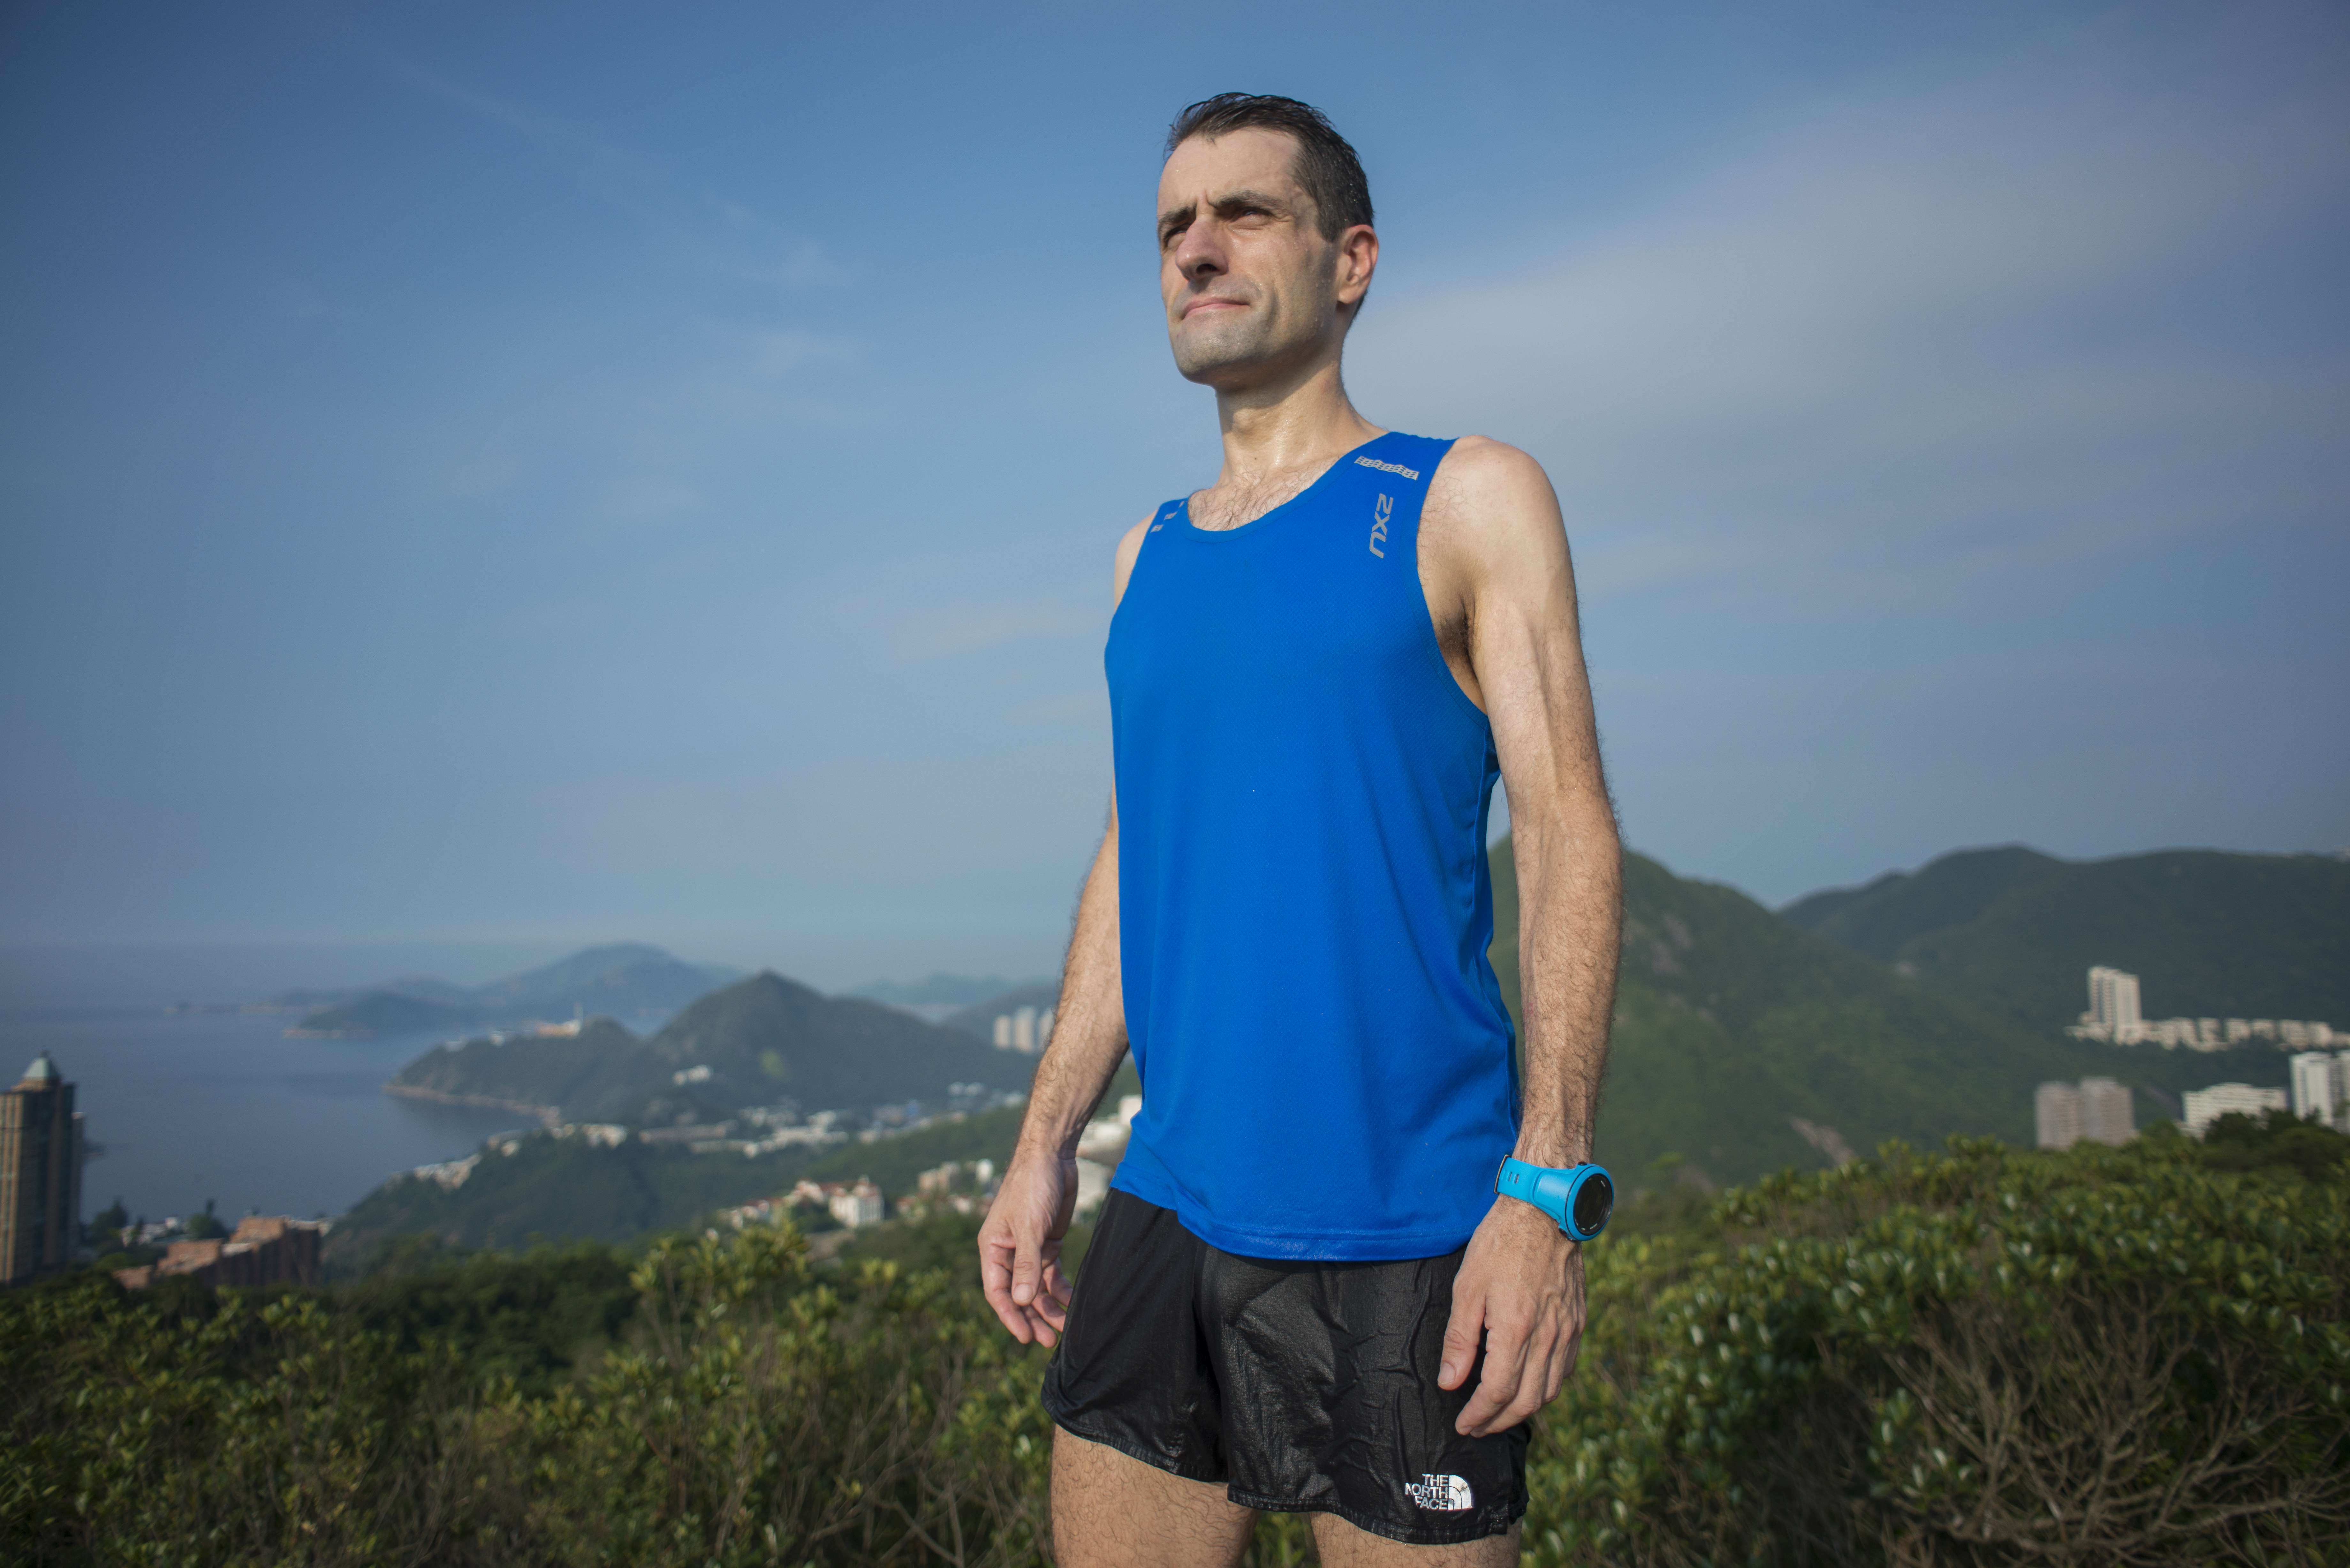 Dennis Theodosis started trail running four years ago.